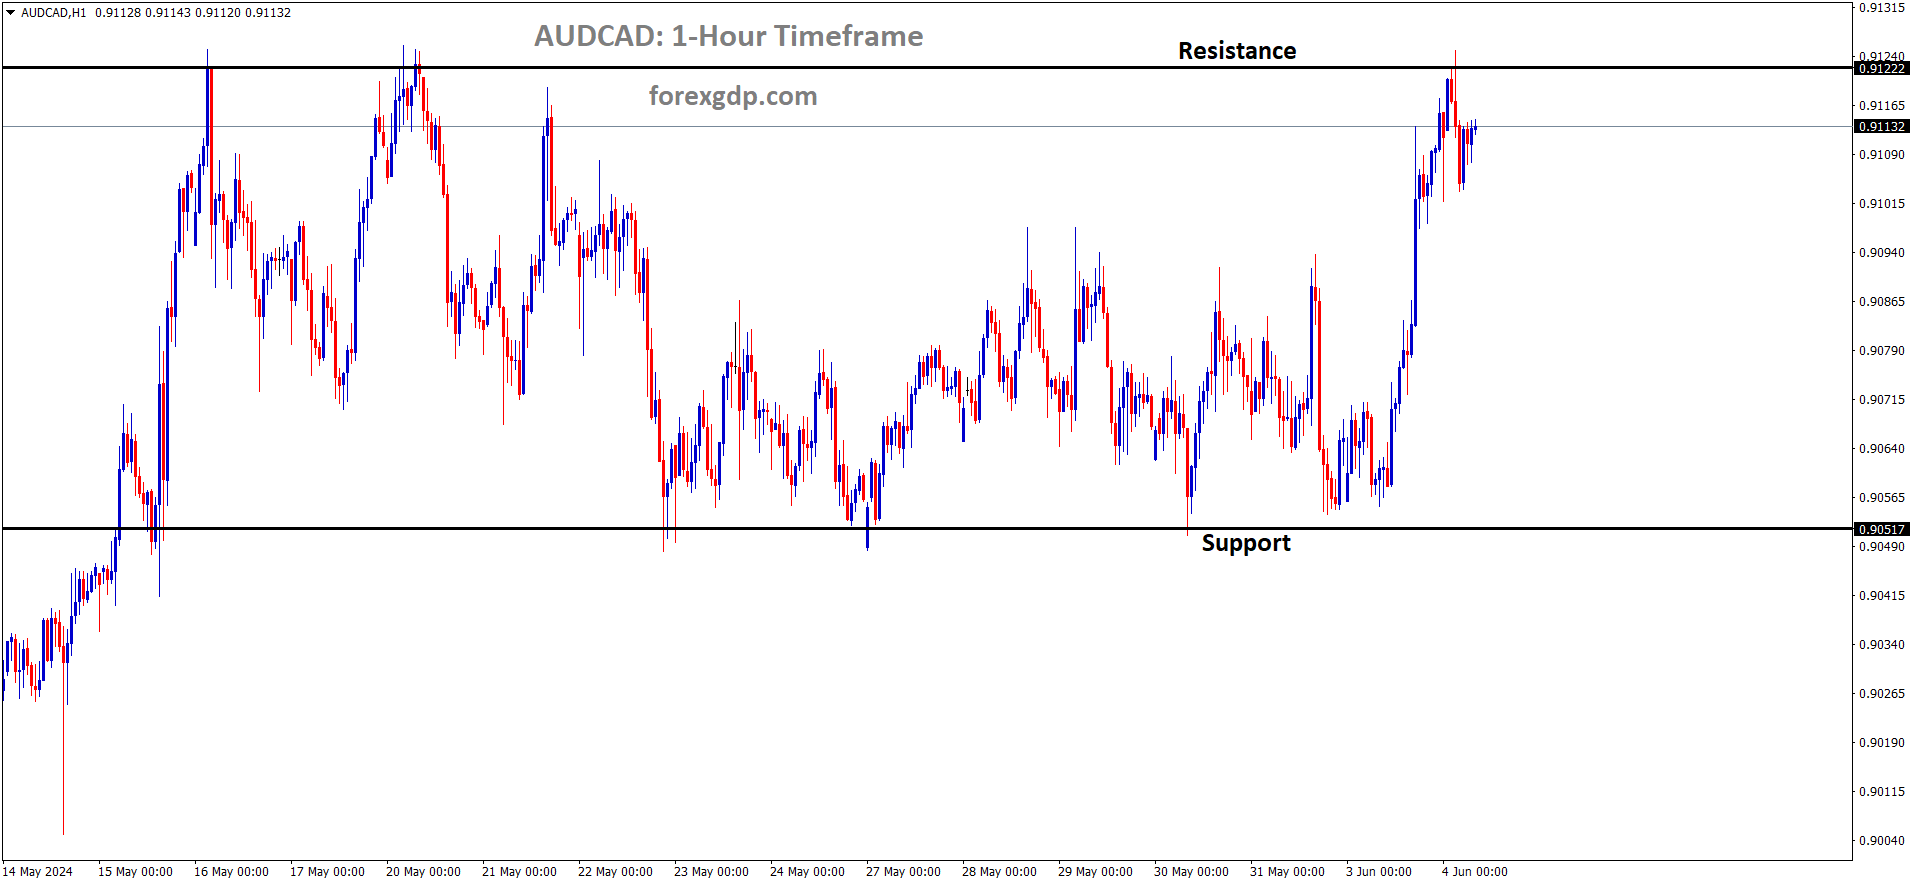 AUDCAD is moving in box pattern 